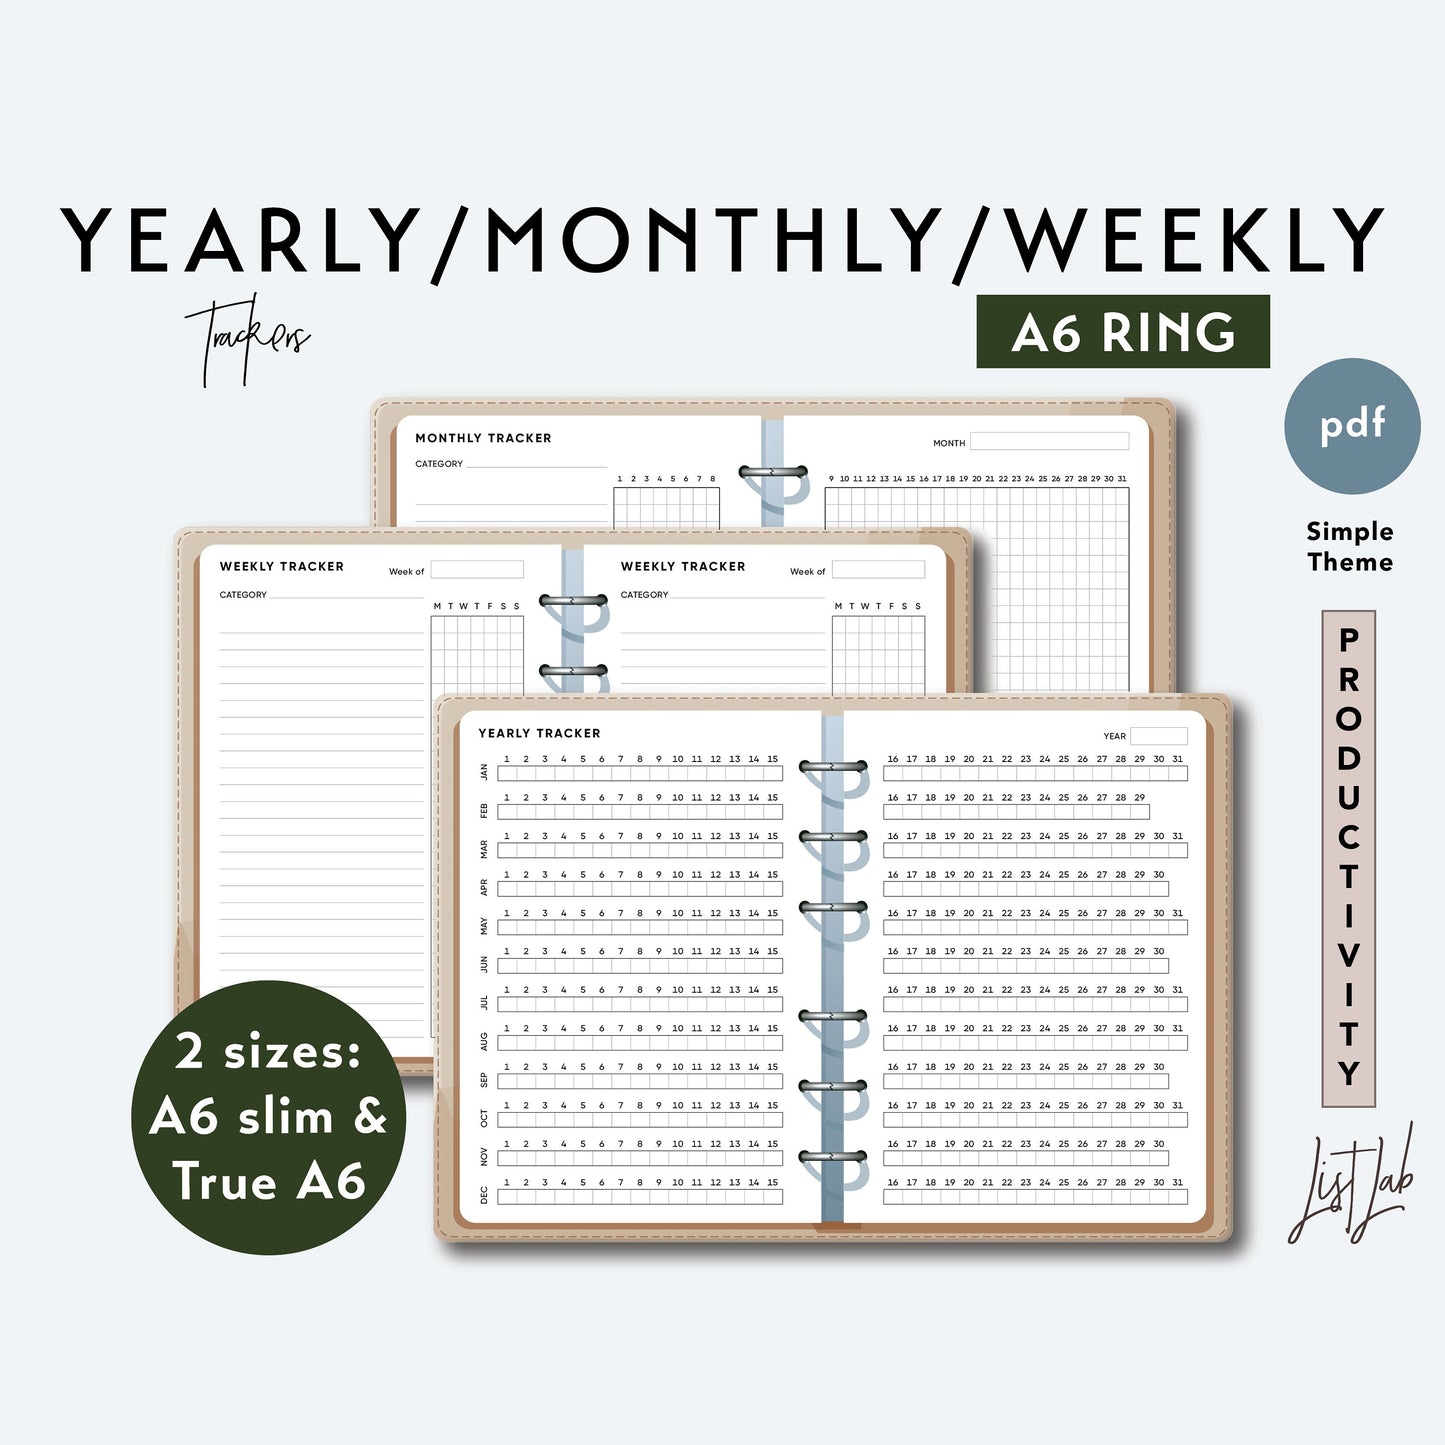 A6 Ring YEARLY, MONTHLY & WEEKLY Trackers Set Printable Set